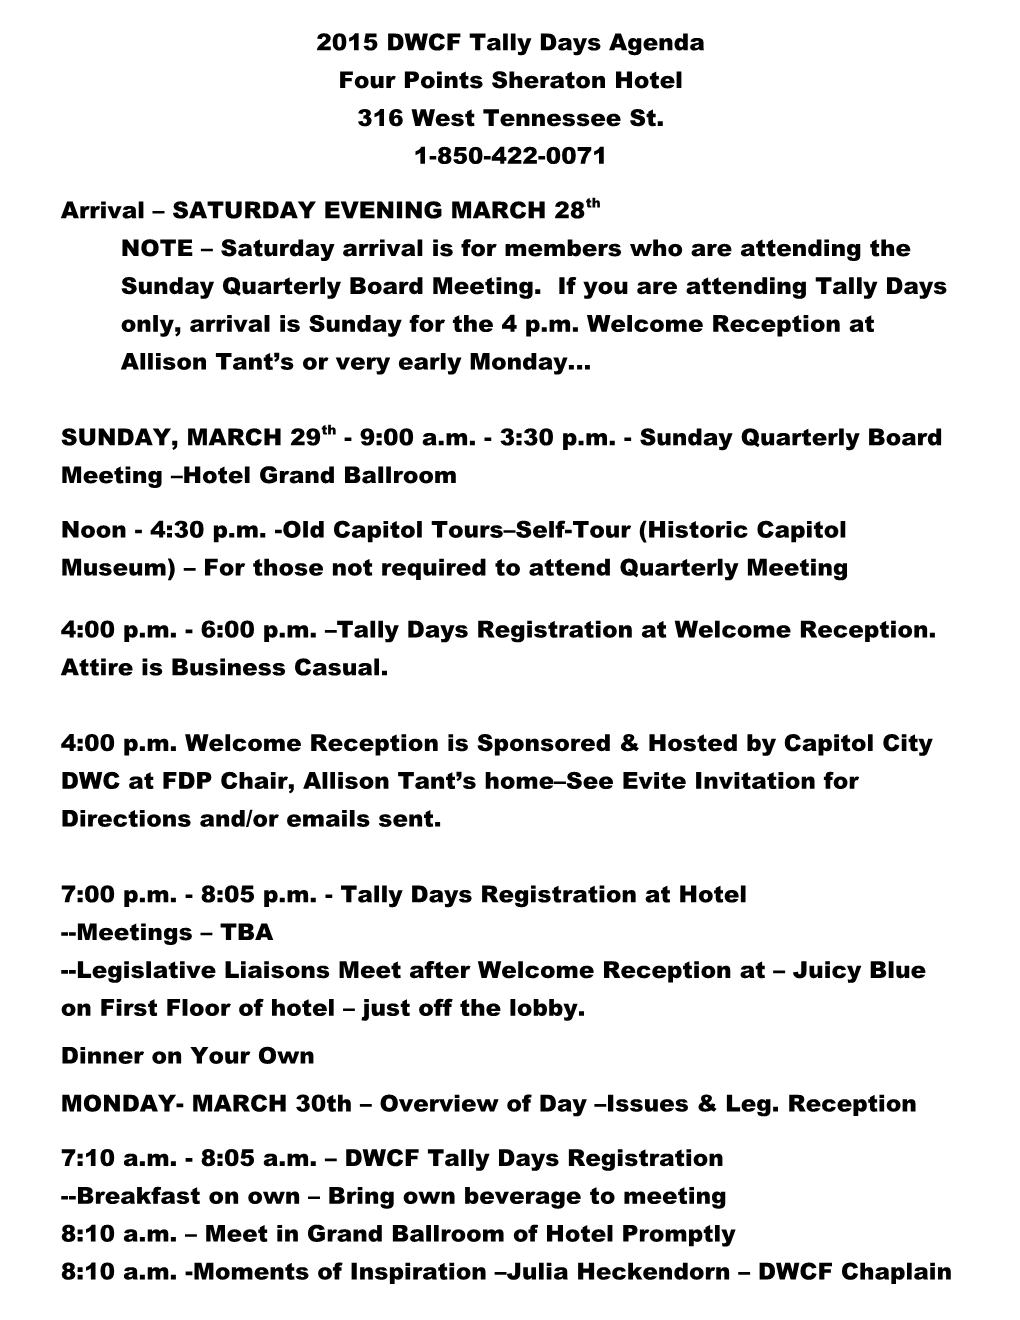 2015 DWCF Tally Days Agenda Four Points Sheraton Hotel 316 West Tennessee St. 1-850-422-0071